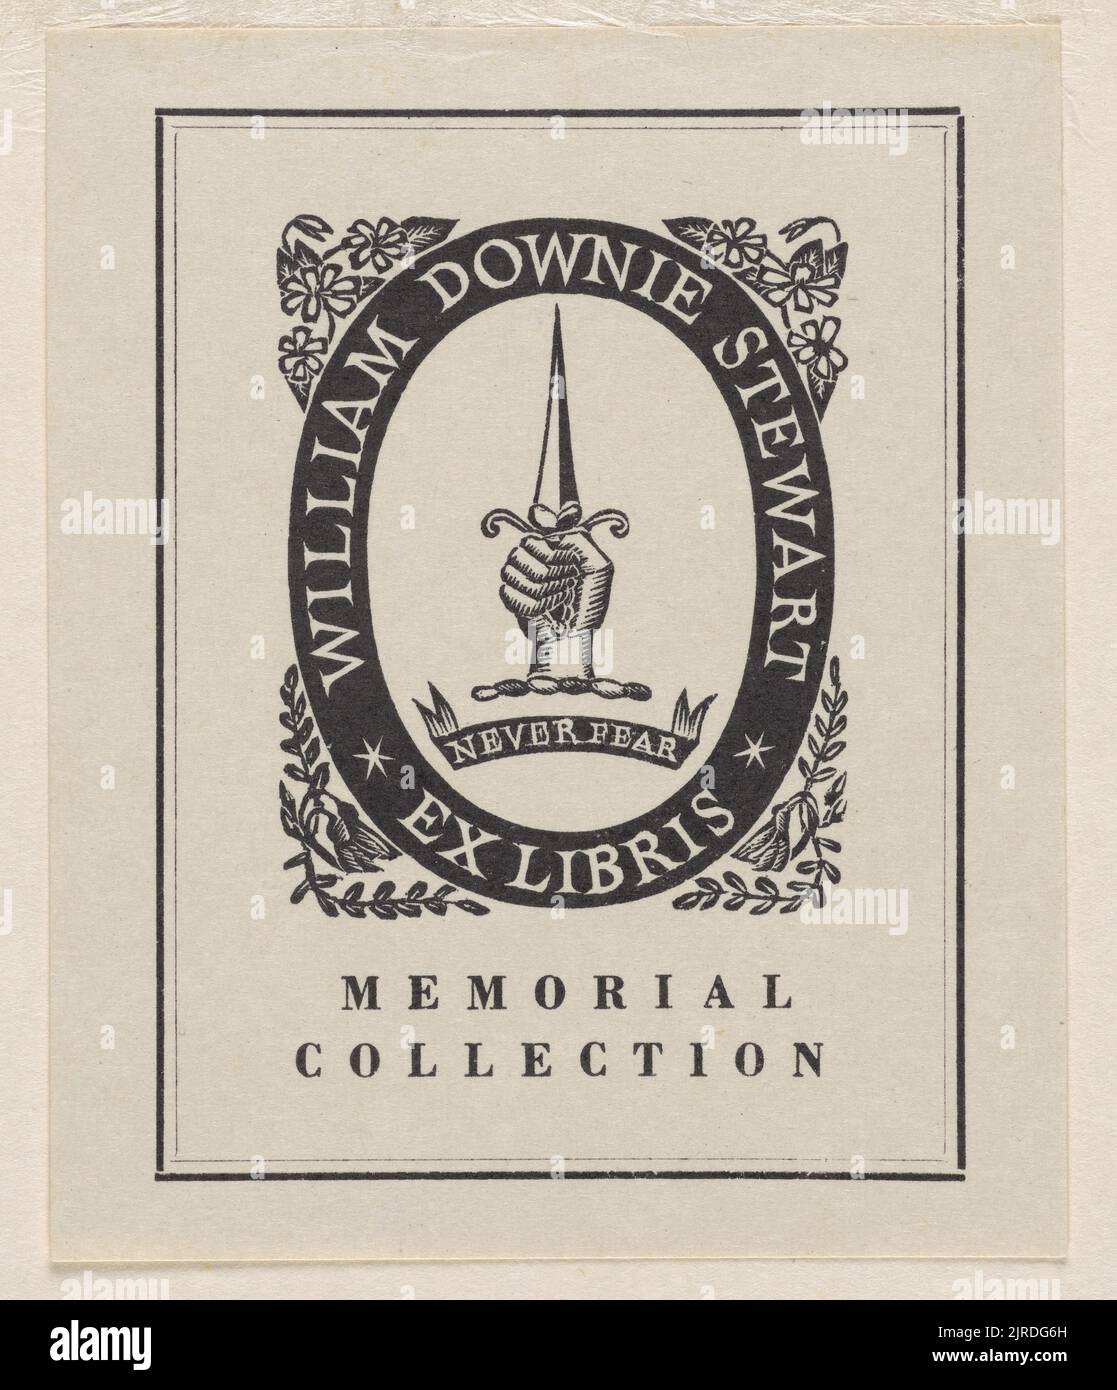 Bookplate: William Downie Stewart Memorial Collection. Ex libris., 1951, Wellington, by E Mervyn Taylor. Gift of Mrs E Henderson, 1987. Stock Photo